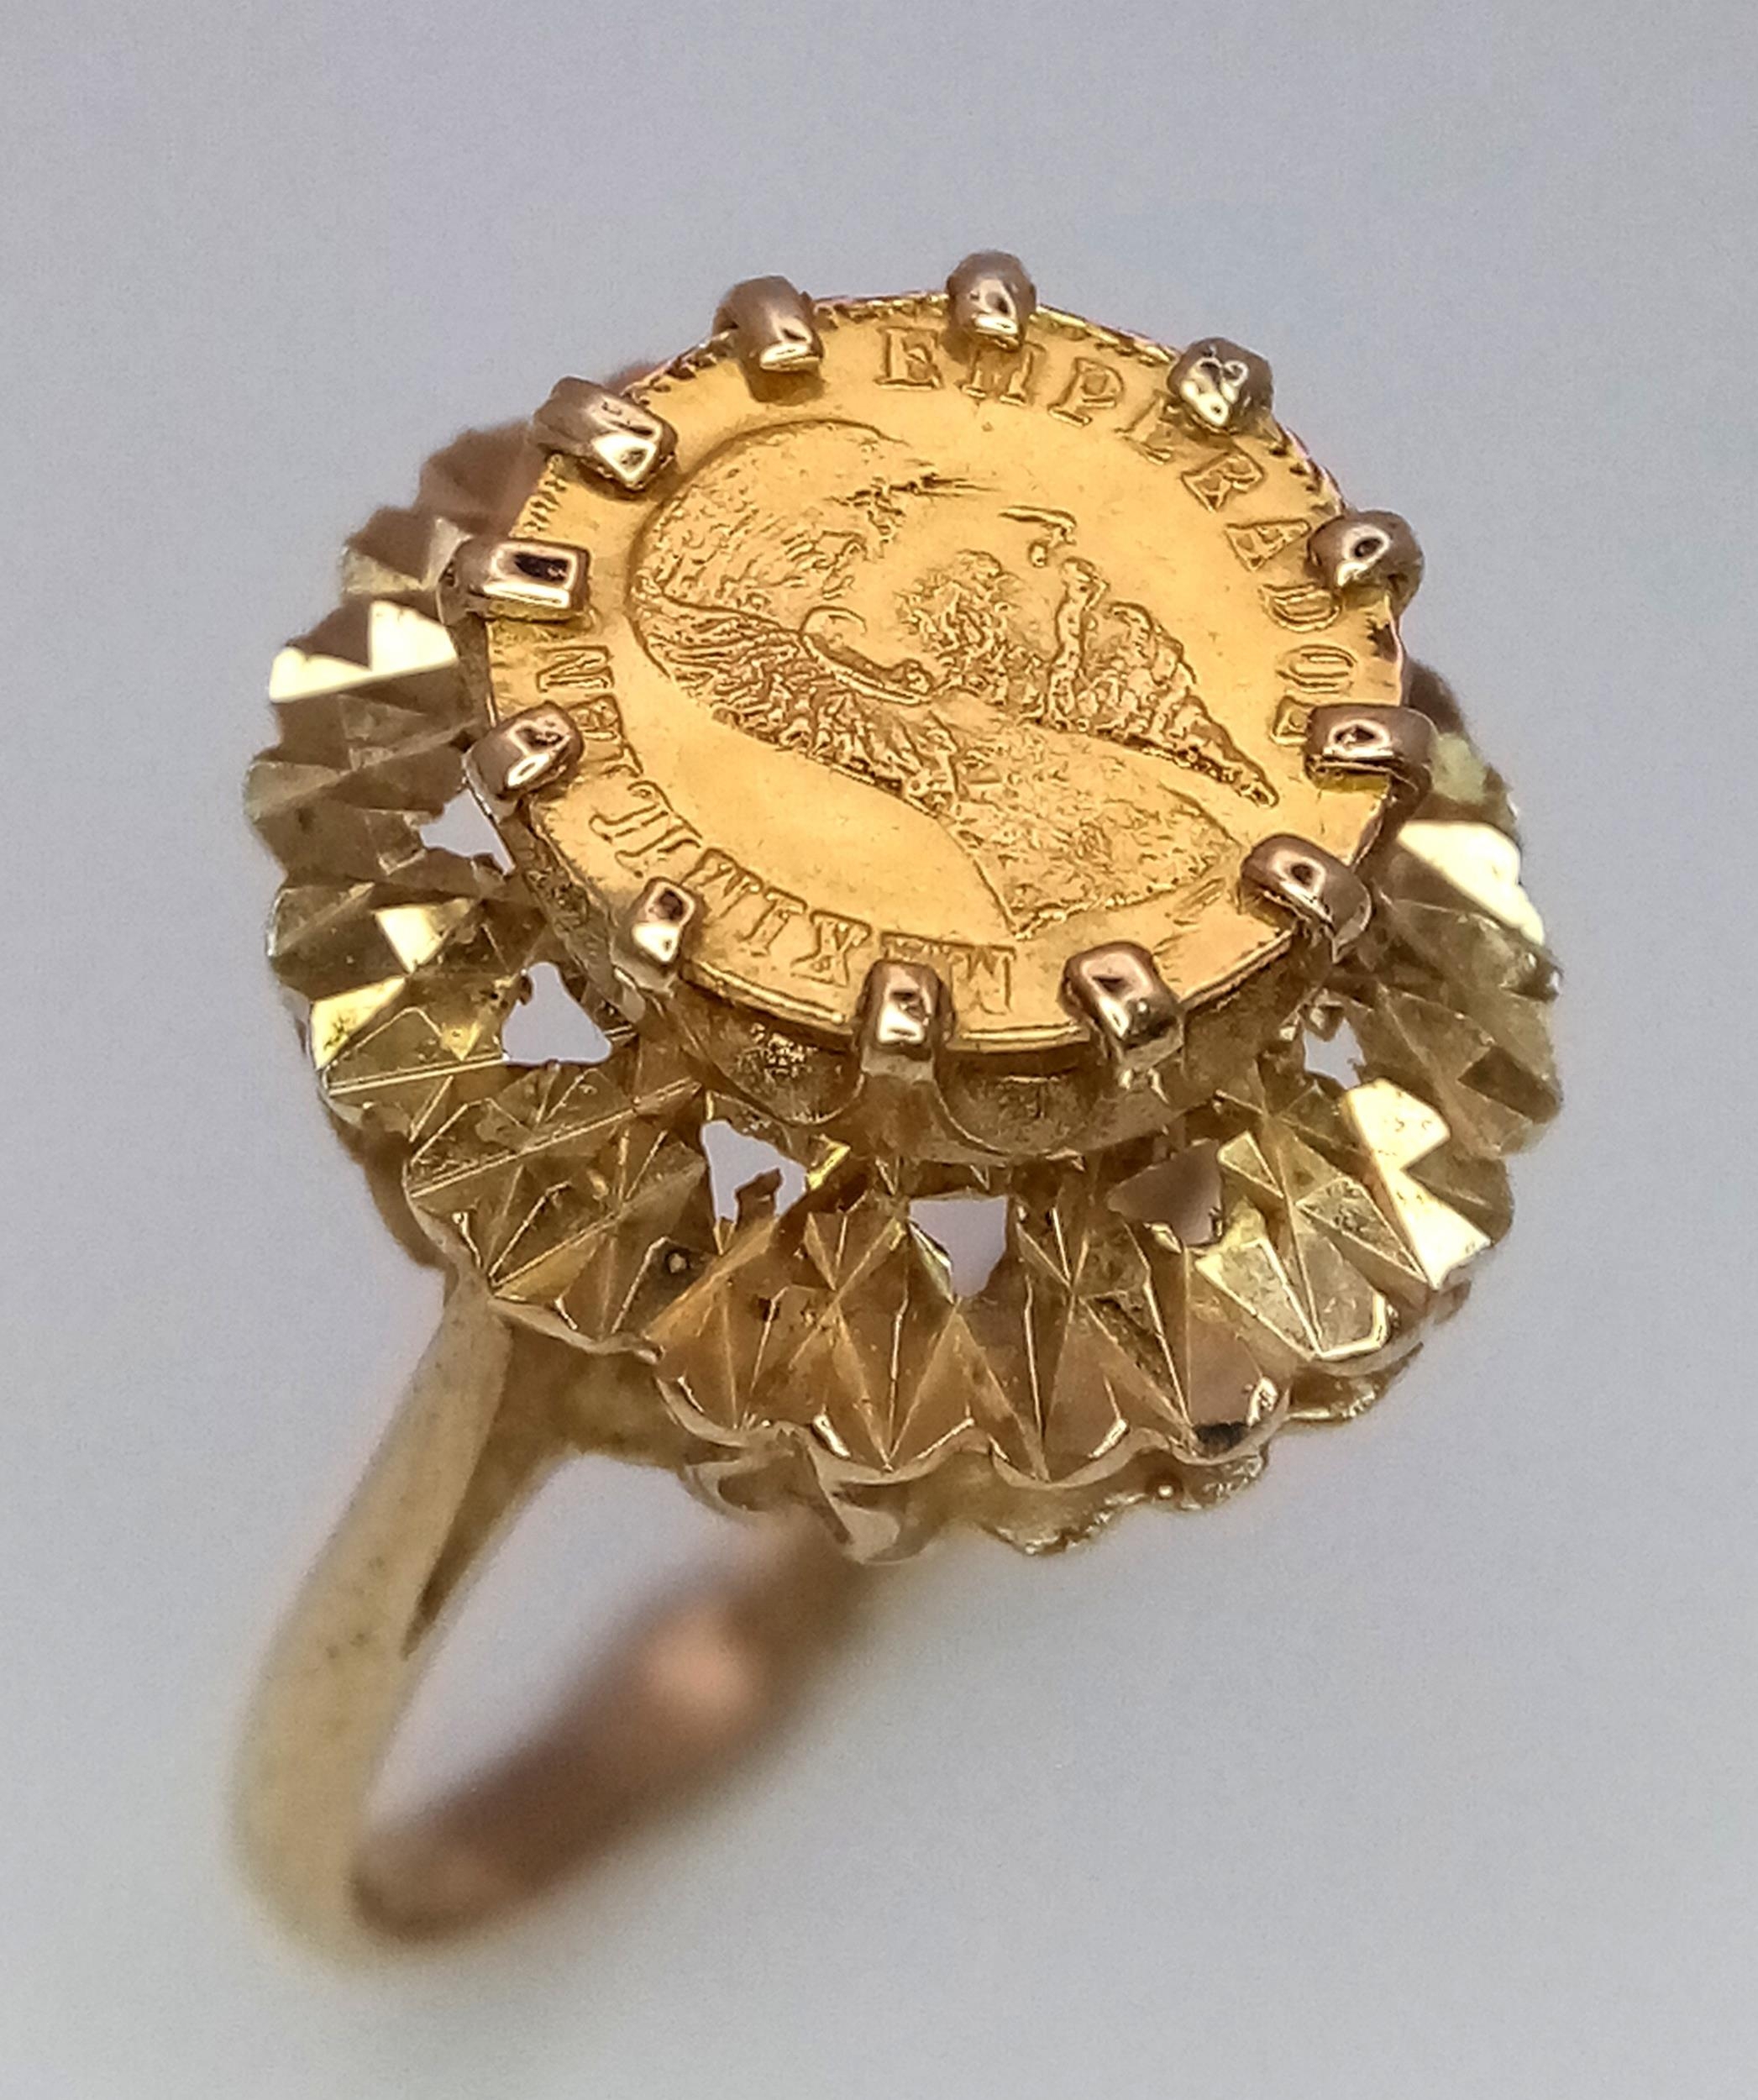 A 9 Carat Gold Tier Mounted Mexican/Columbian Gold Coin Set Ring Size P. Lower Crown Tier Measures - Image 3 of 5